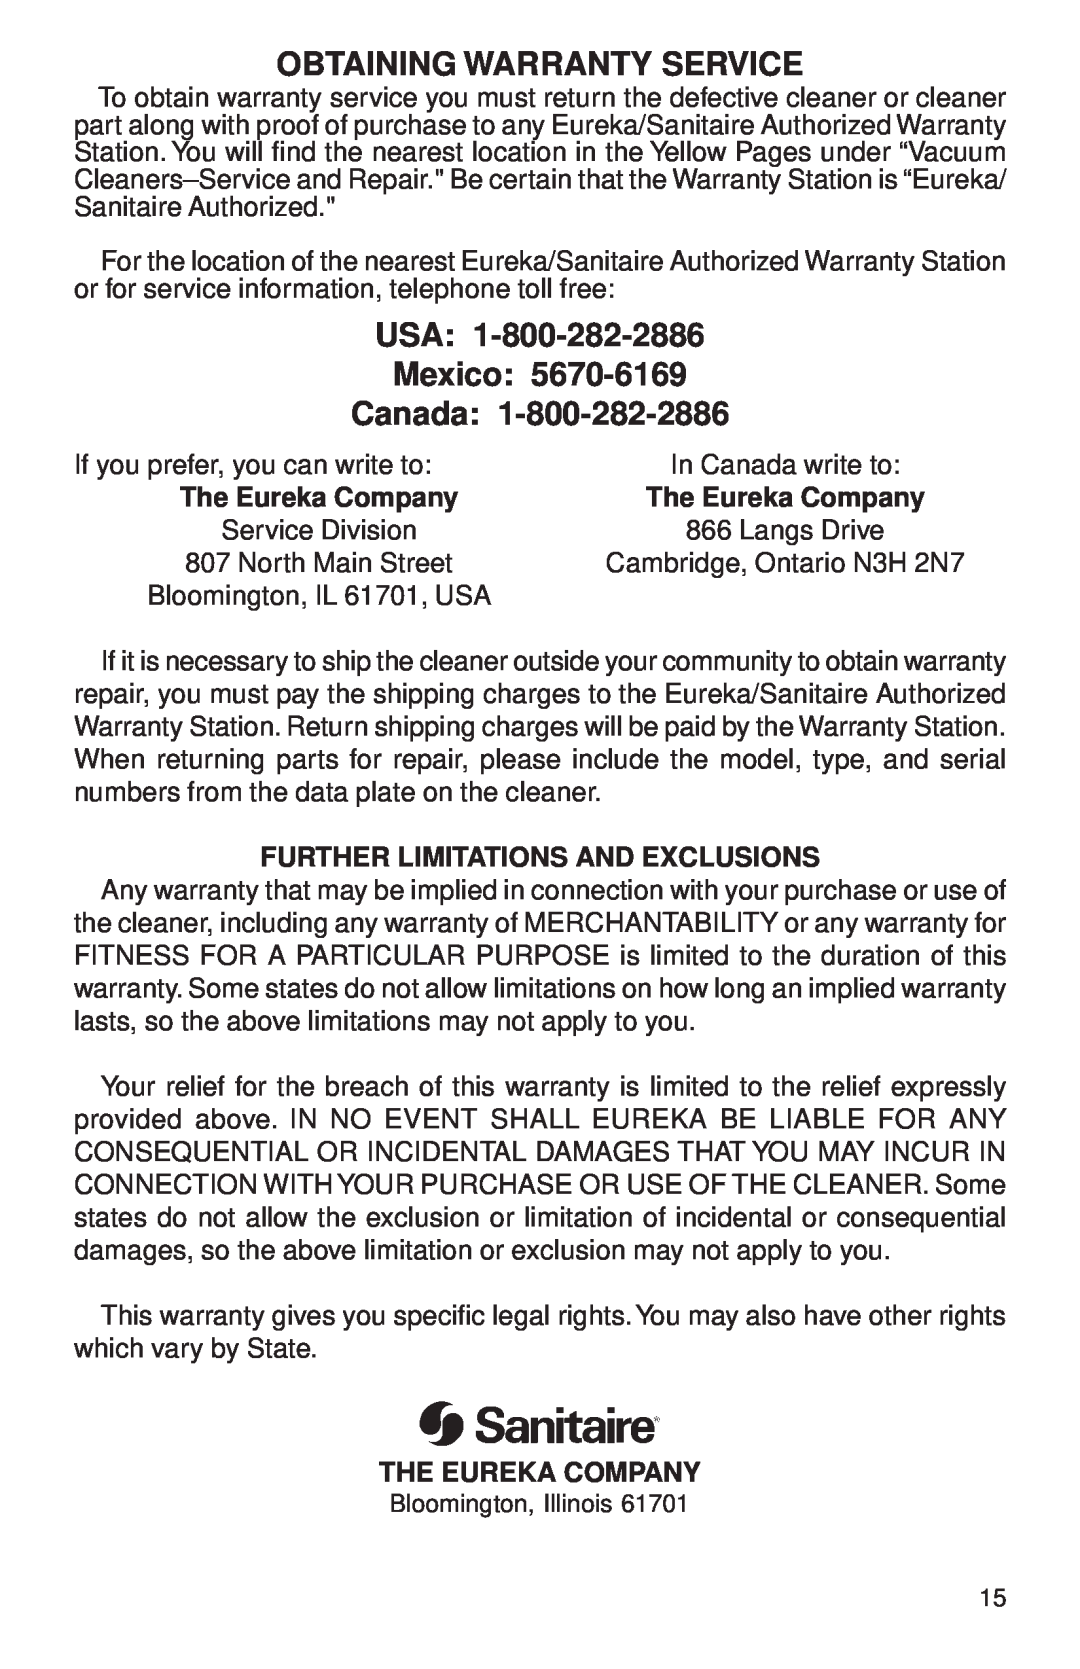 Sanitaire SC3699 Series, SC3680 Series Obtaining Warranty Service, The Eureka Company, Further Limitations And Exclusions 